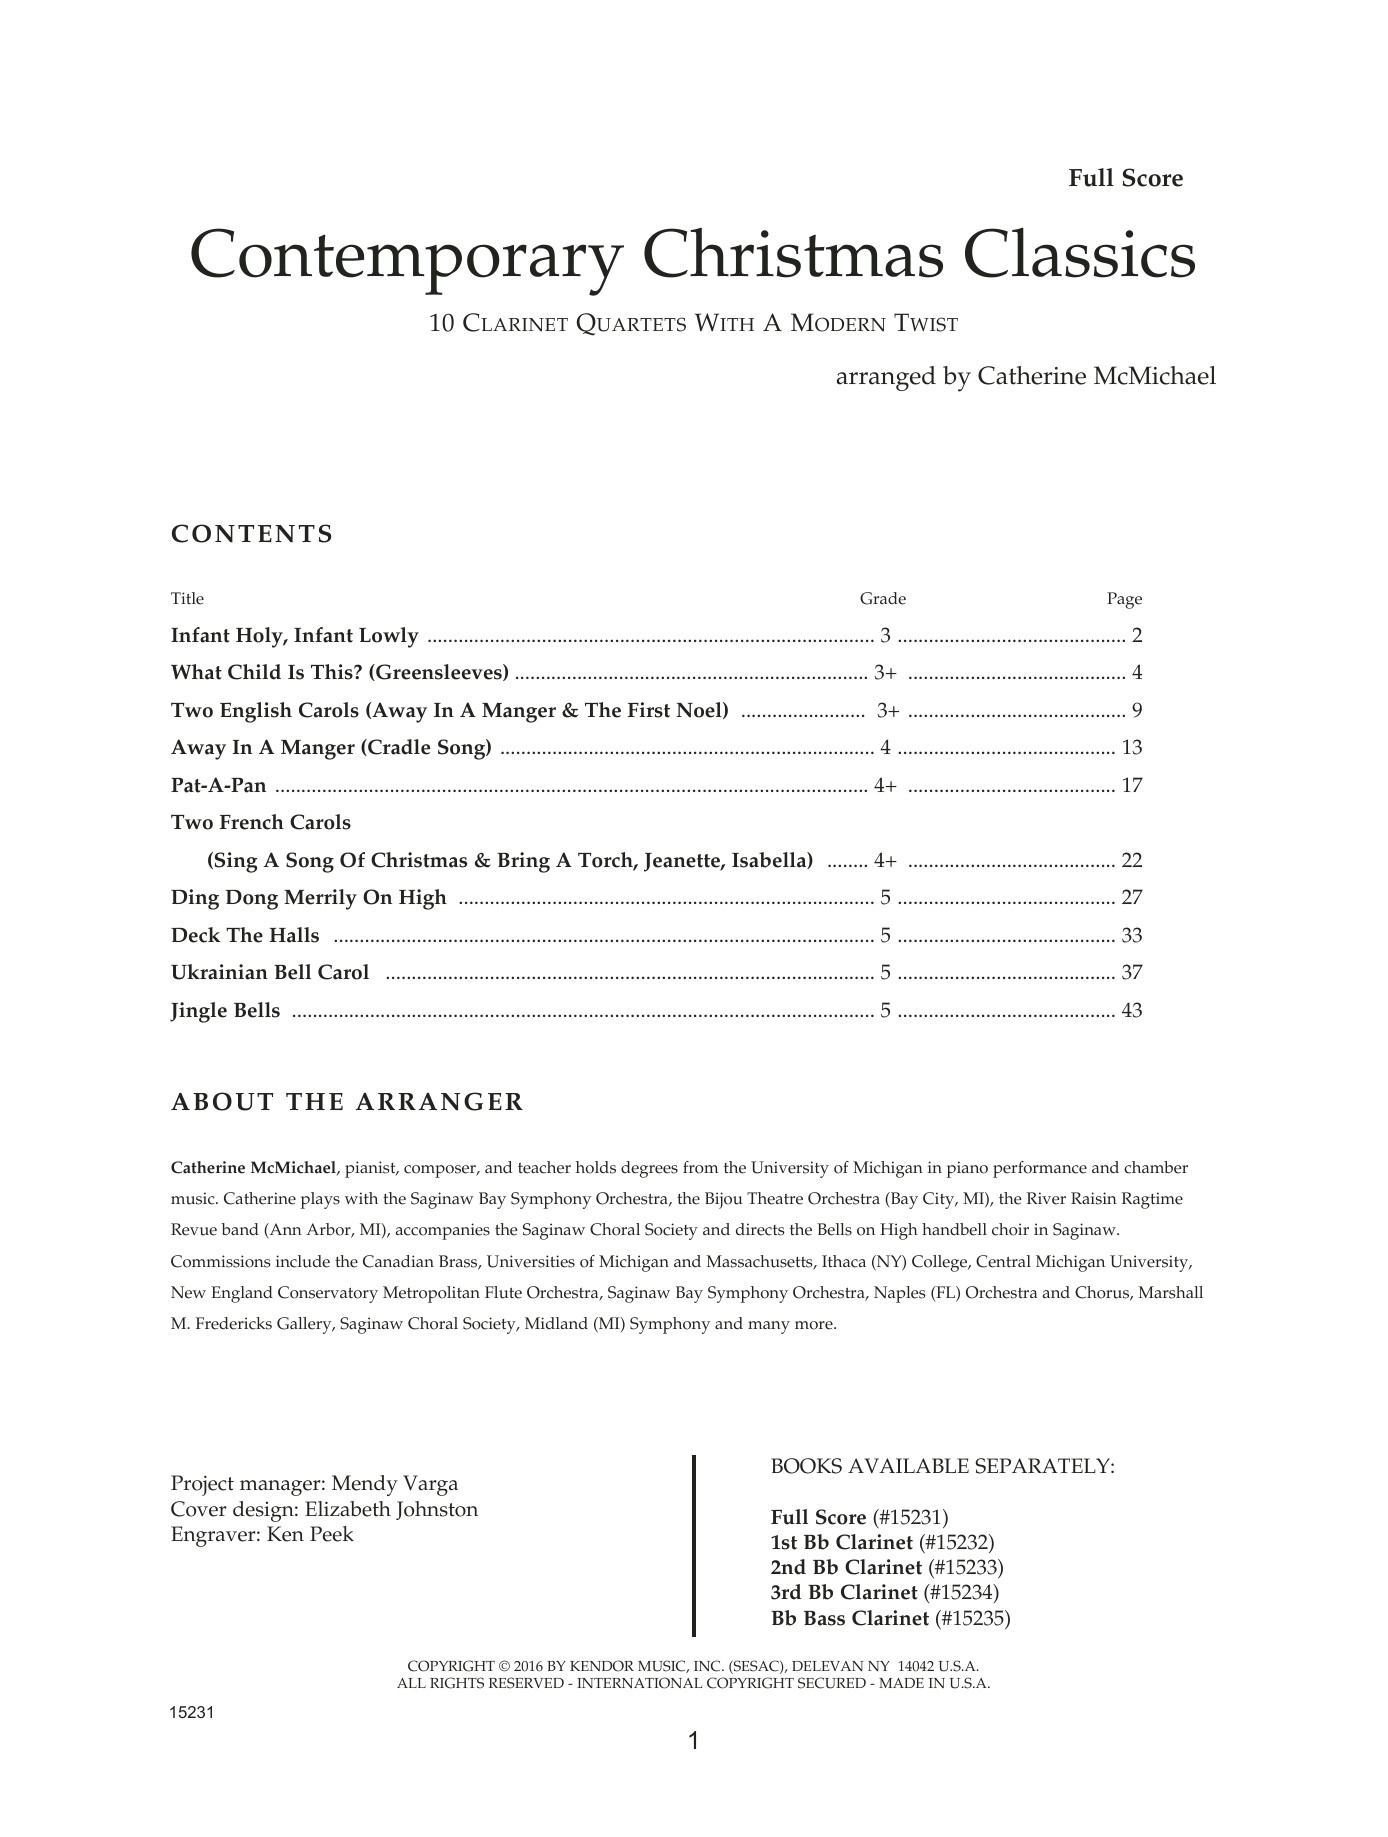 Download Catherine McMichael Contemporary Christmas Classics - Full Sheet Music